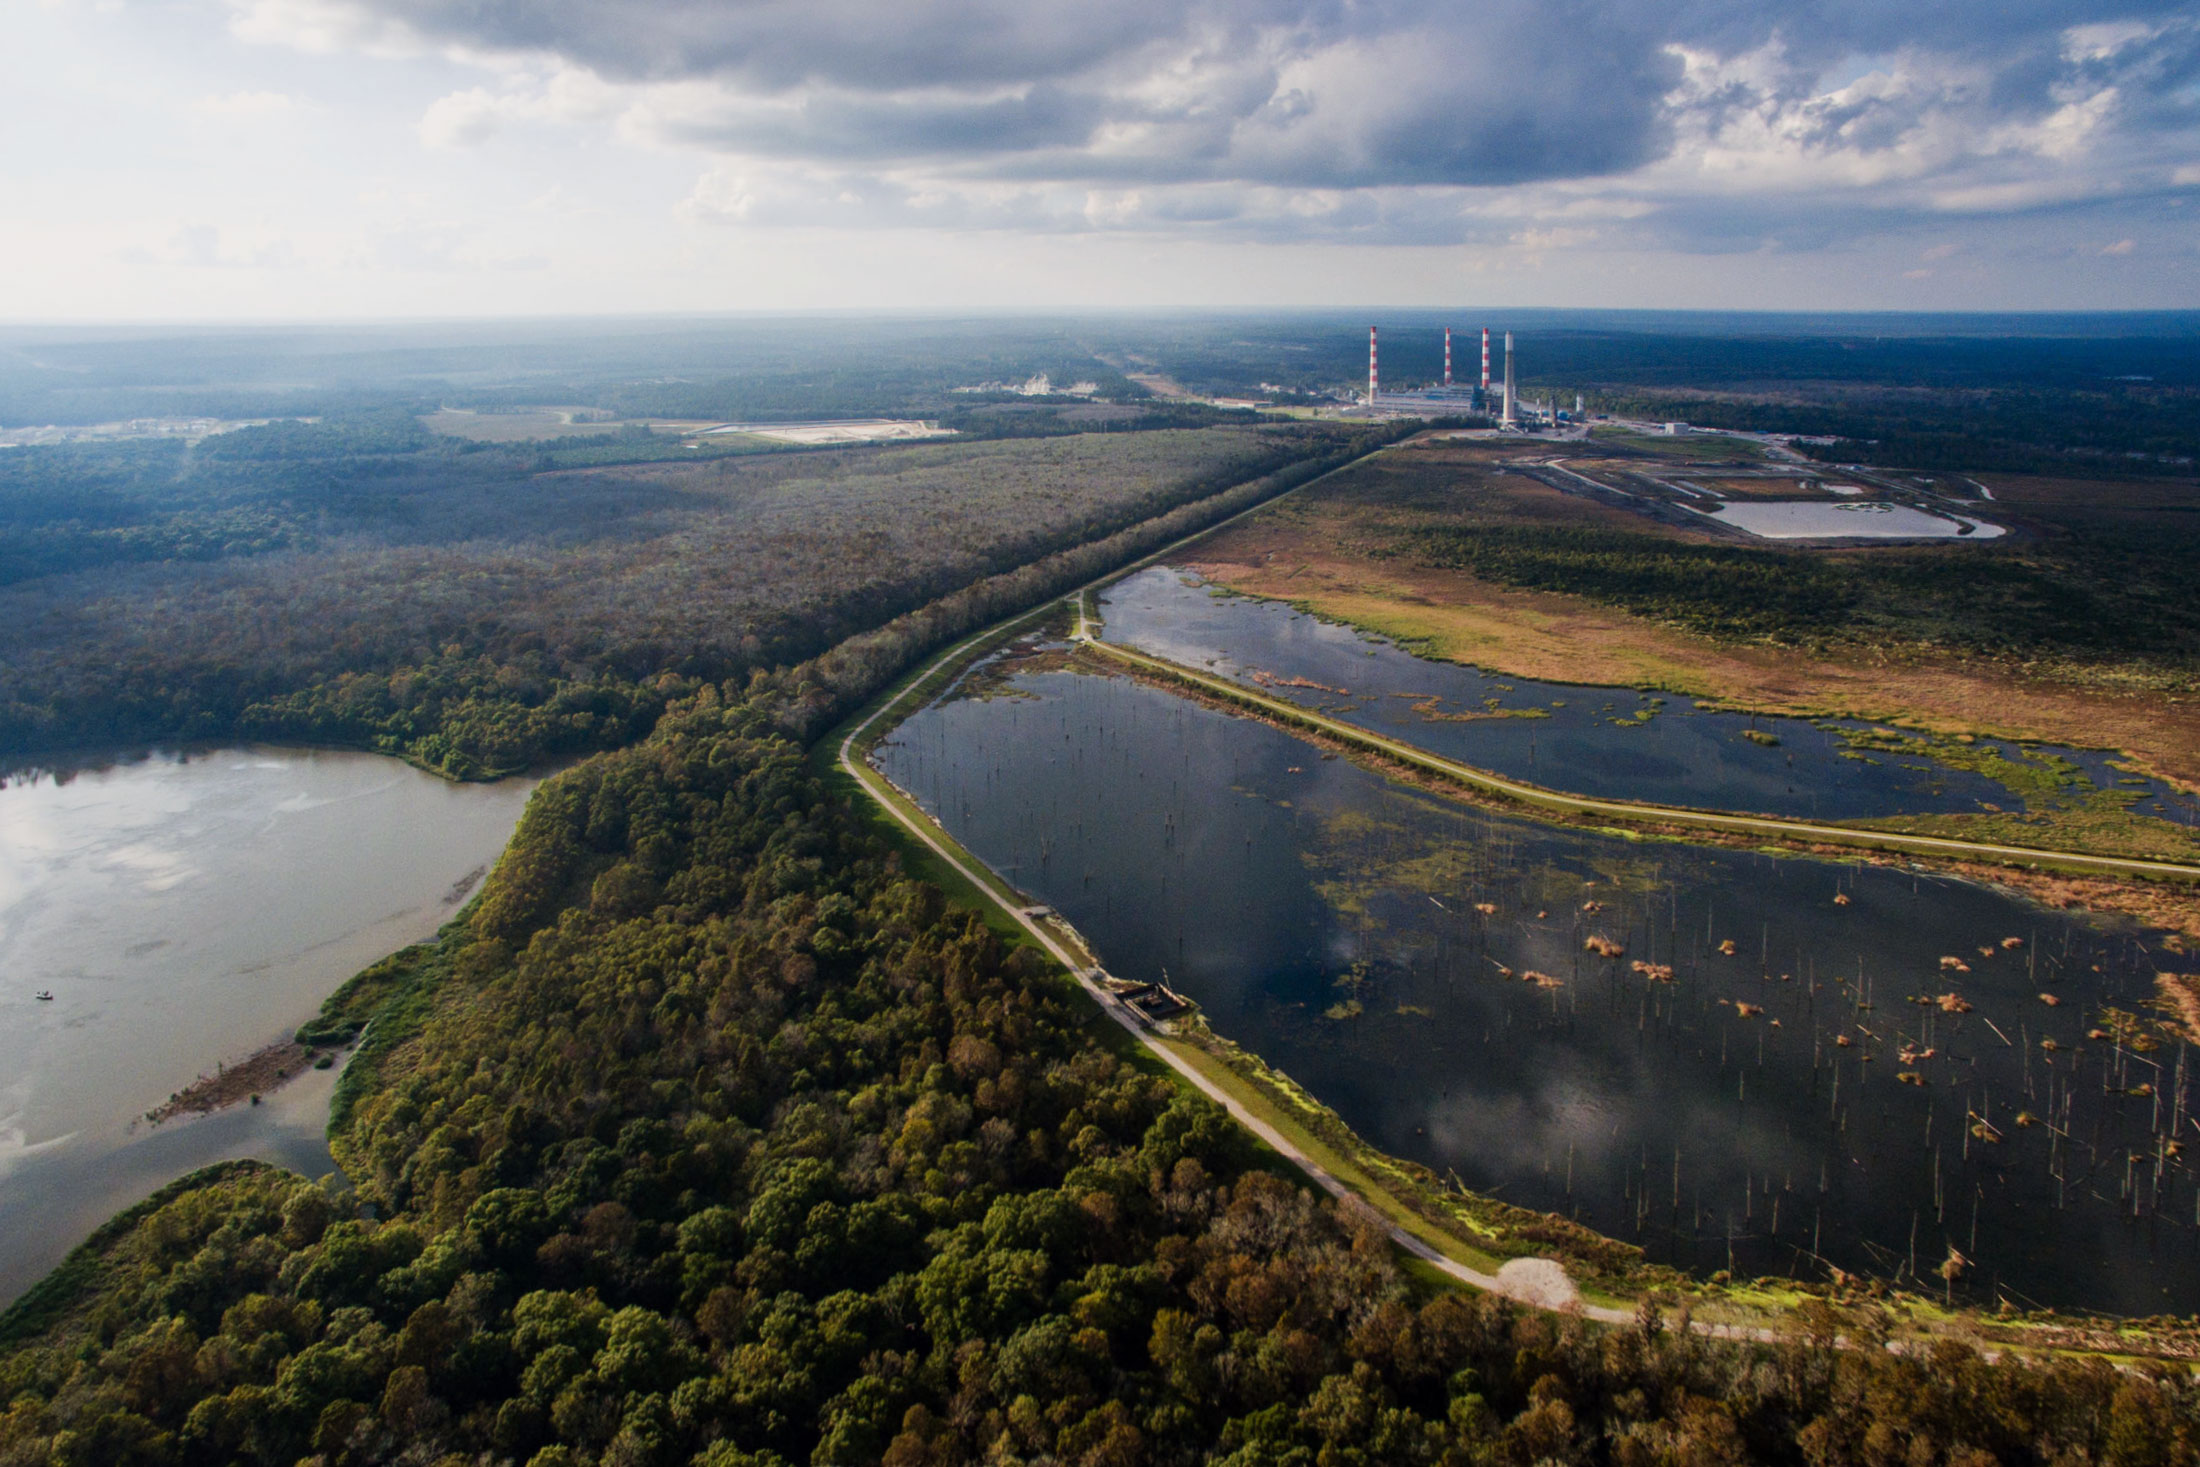 The coal and natural gas-powered Barry plant sits&nbsp;adjacent to the Mobile River in the Mobile-Tensaw Delta.